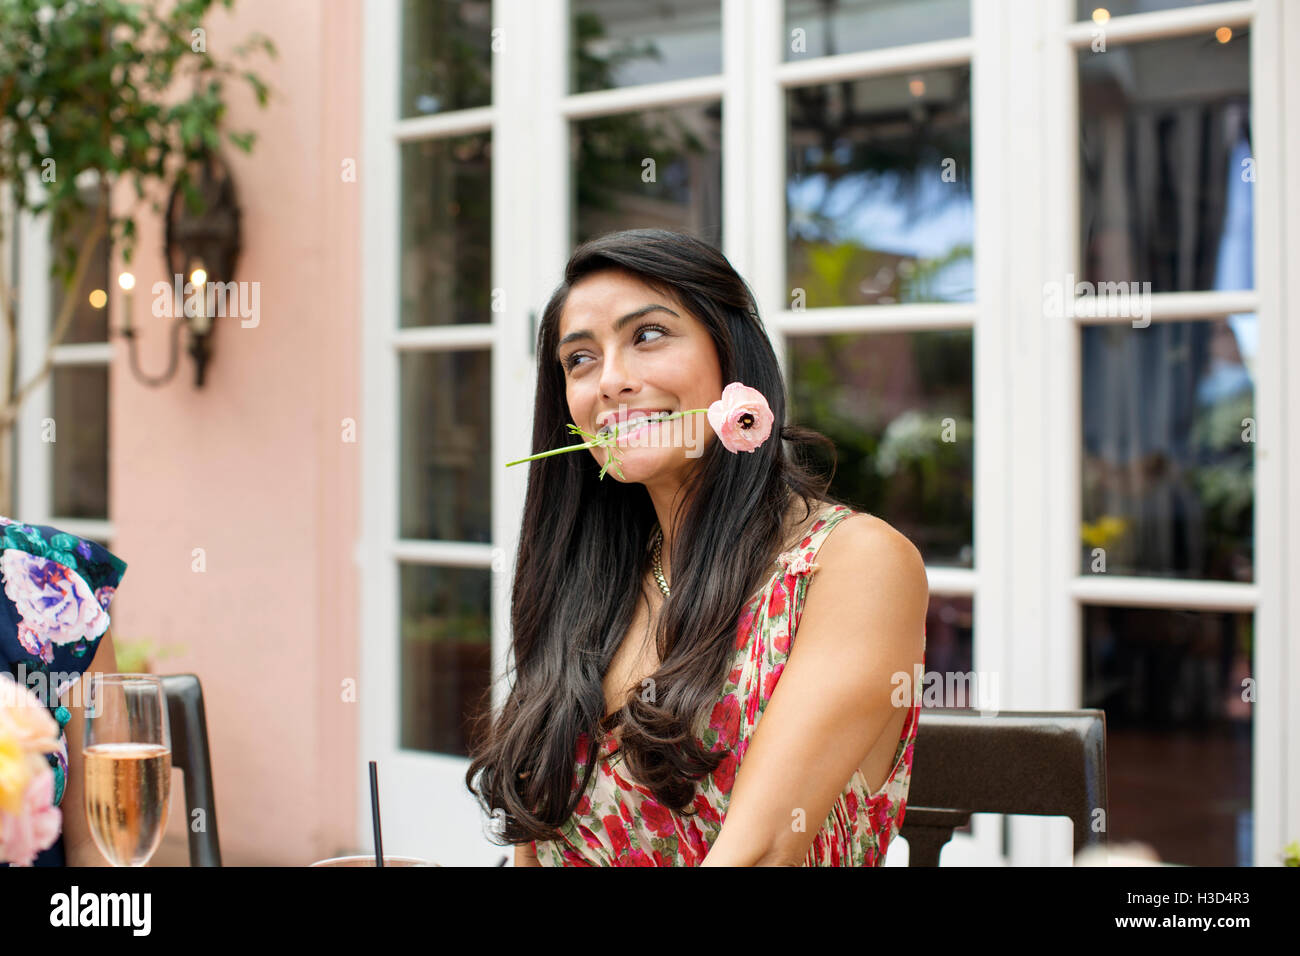 Beautiful woman holding flower in mouth at outdoor restaurant Stock Photo